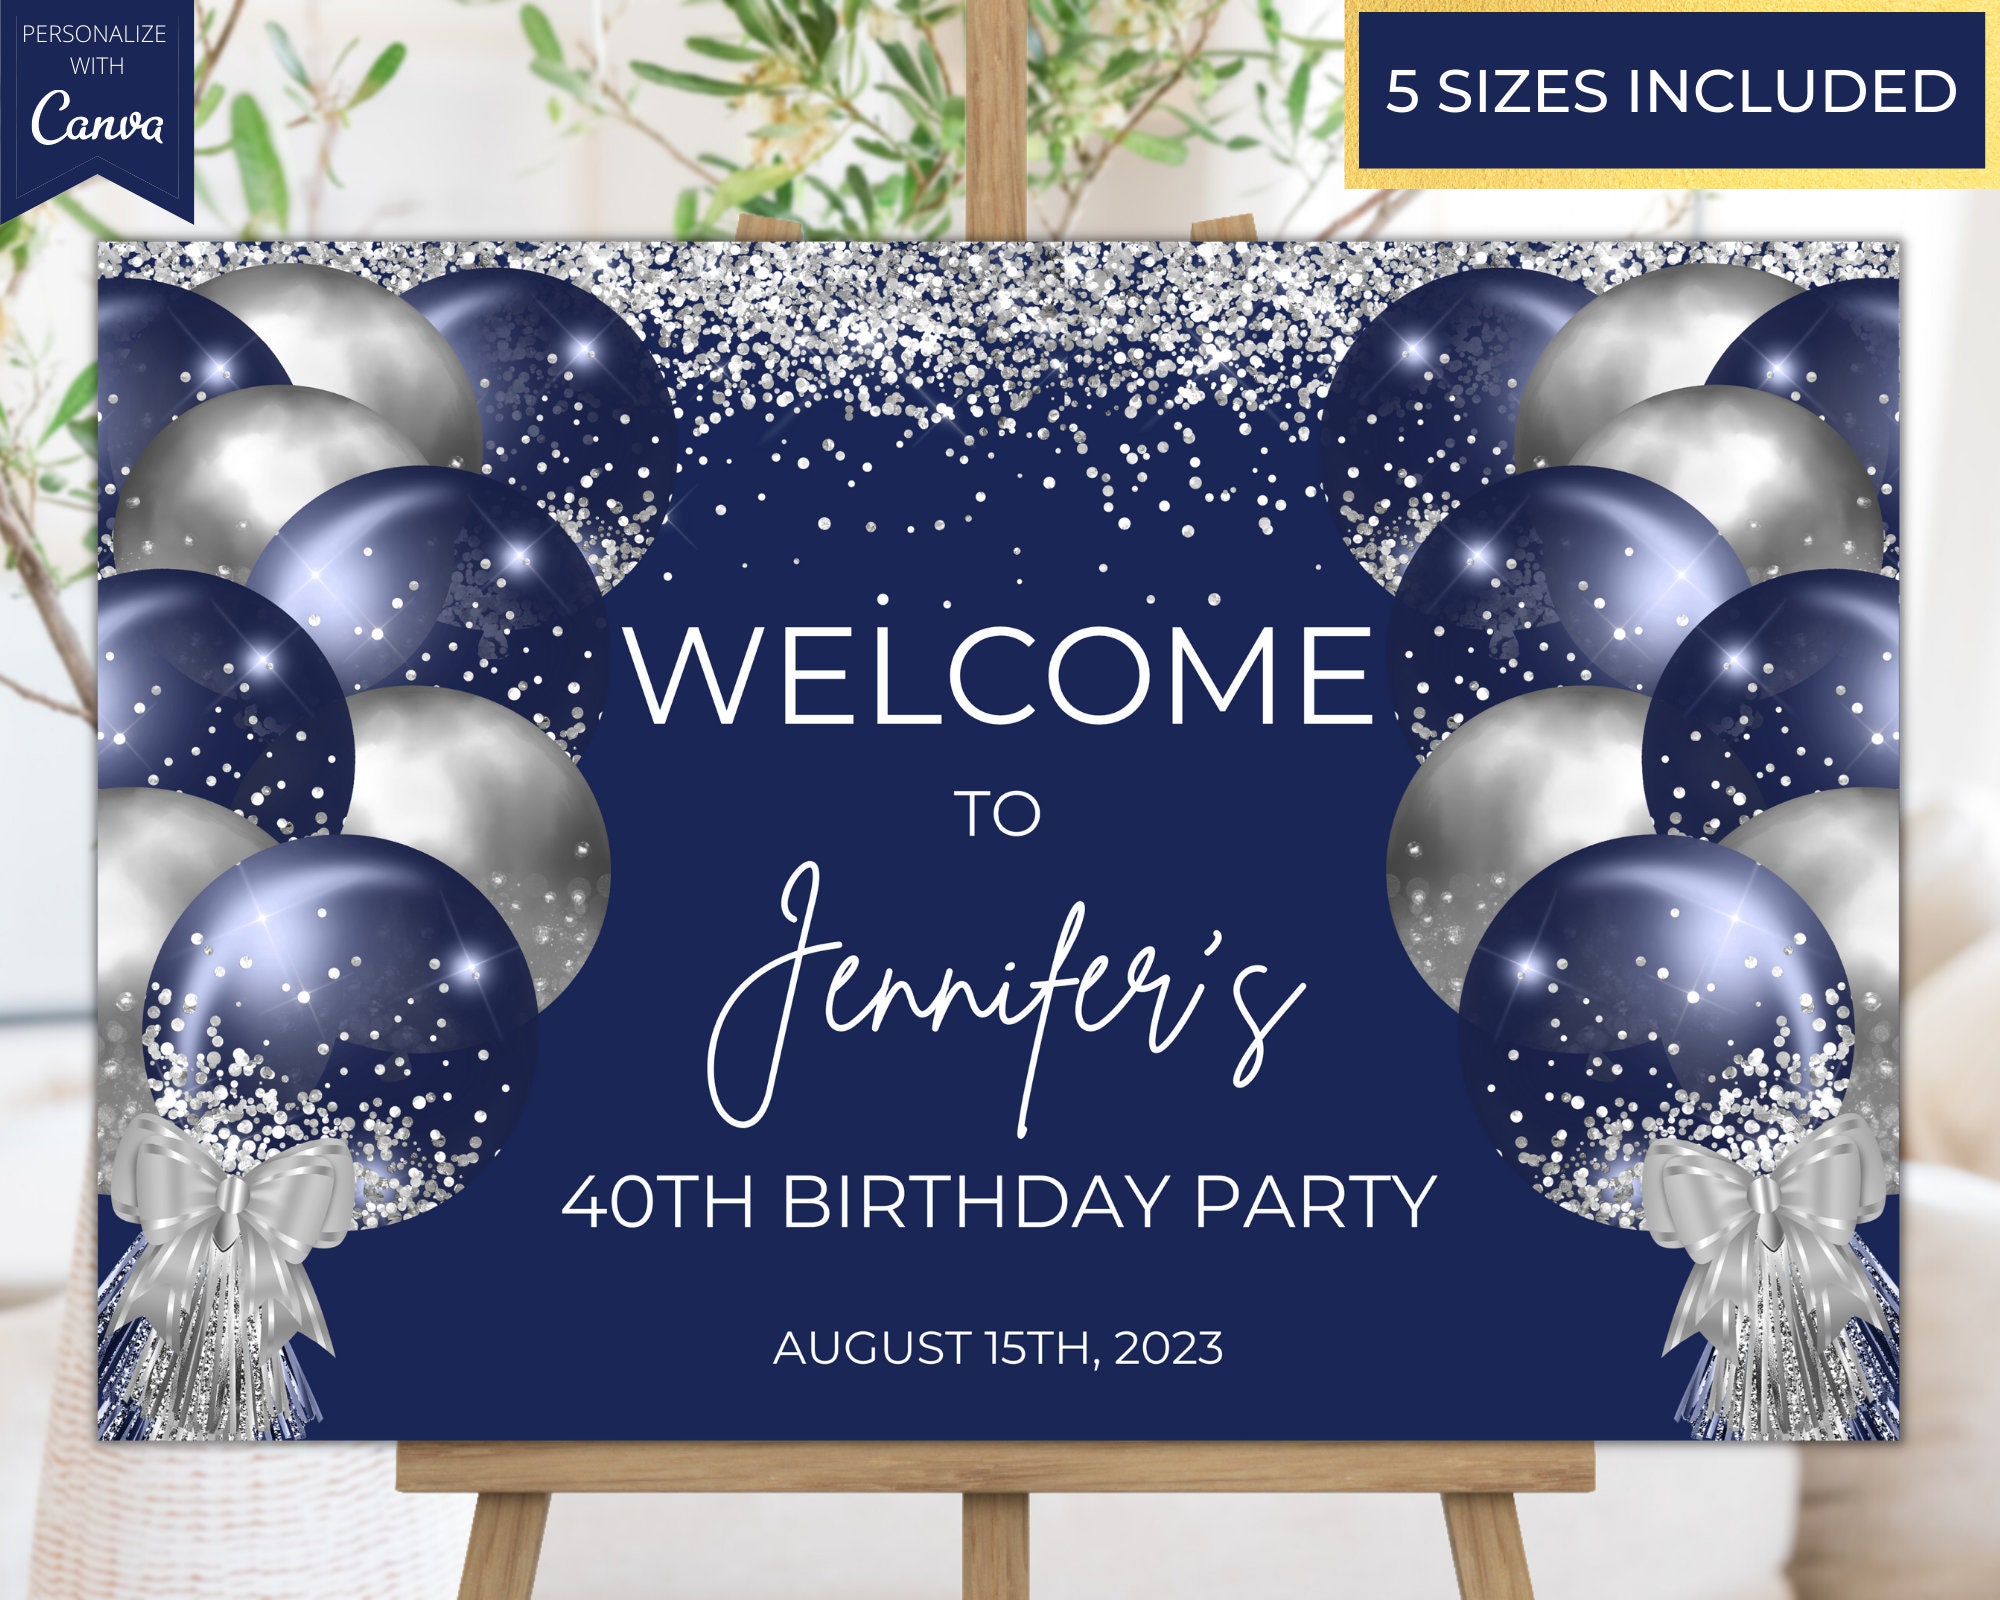 Happy Birthday Backdrop Banner, Navy Blue and Silver Glitter Birthday Party